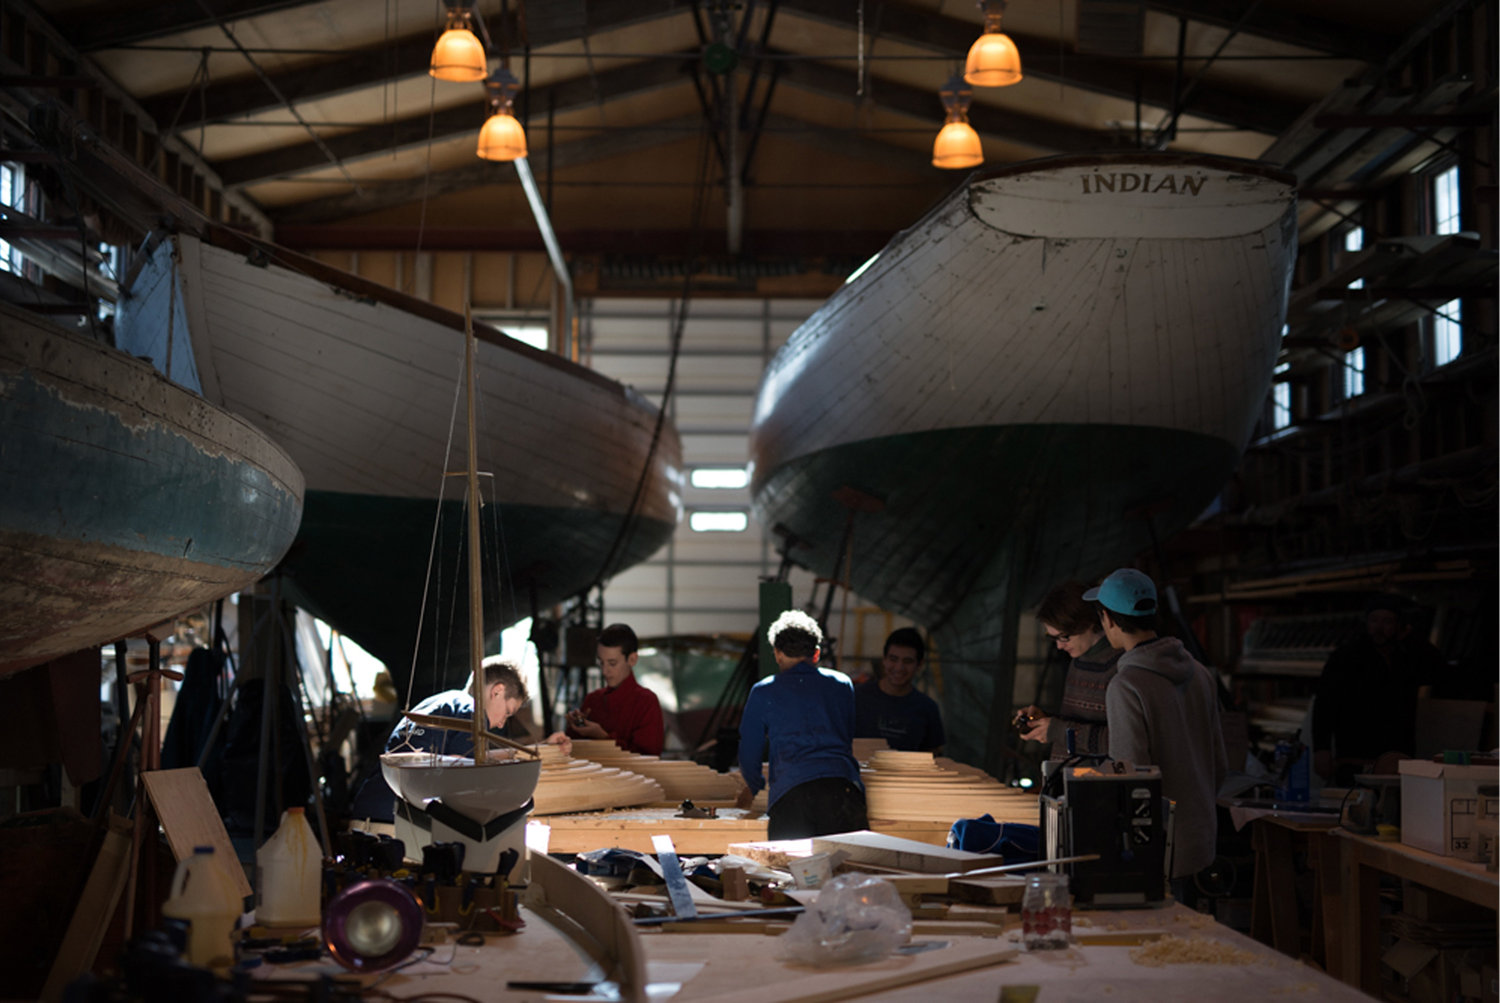 The Herreshoff offers mooring rates for visits